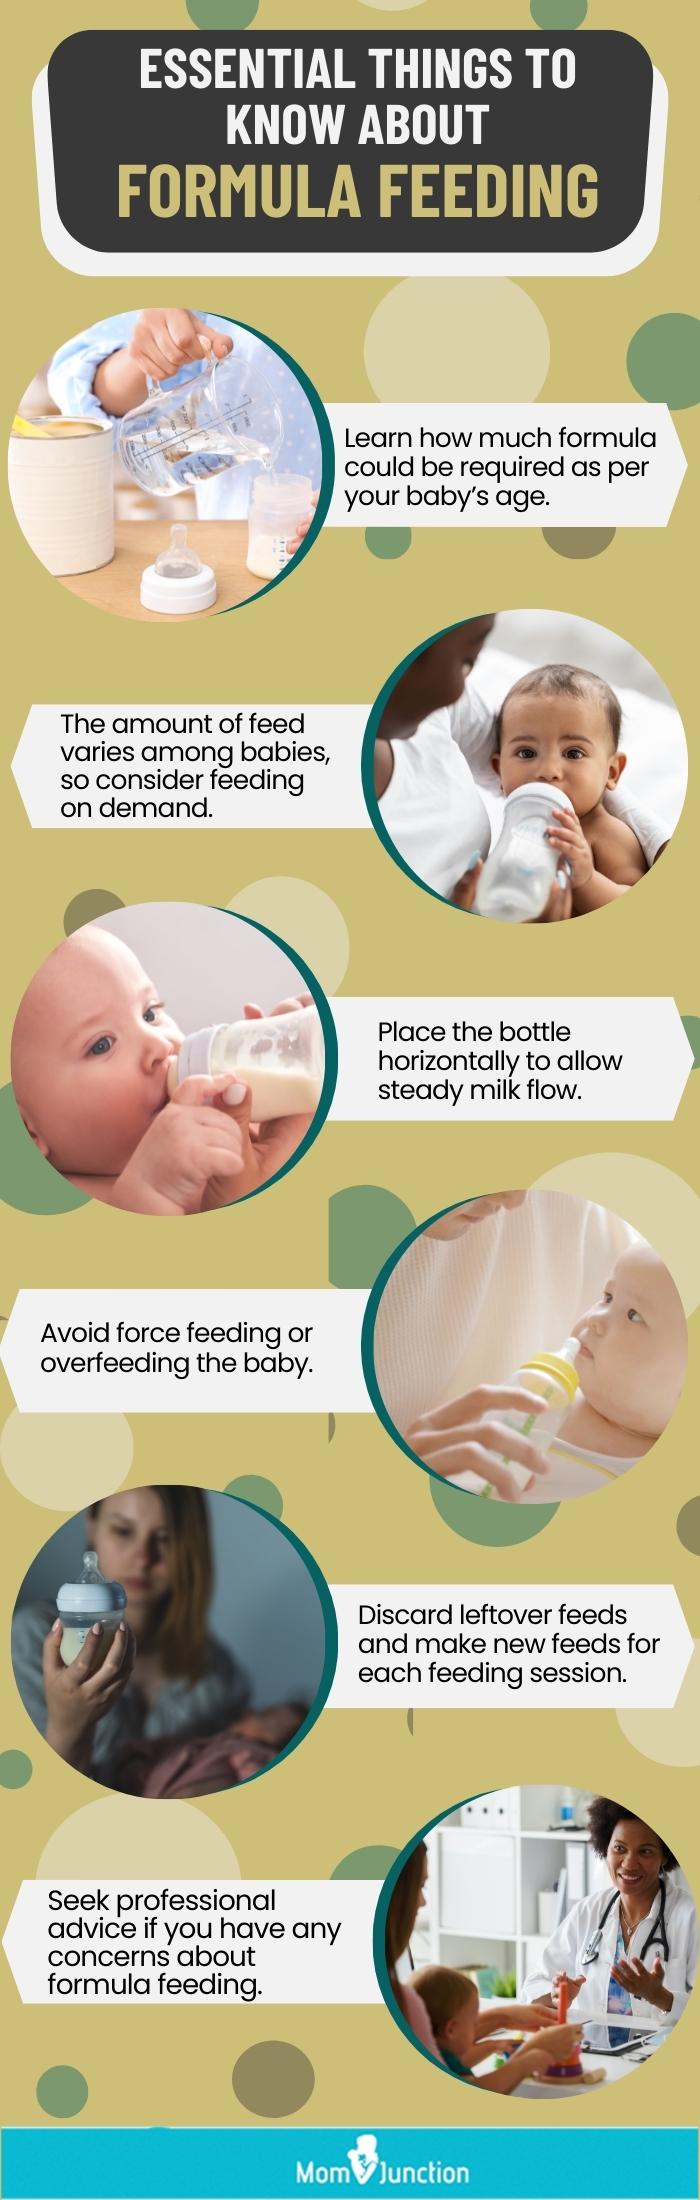 How Much Formula Does Your Baby Need